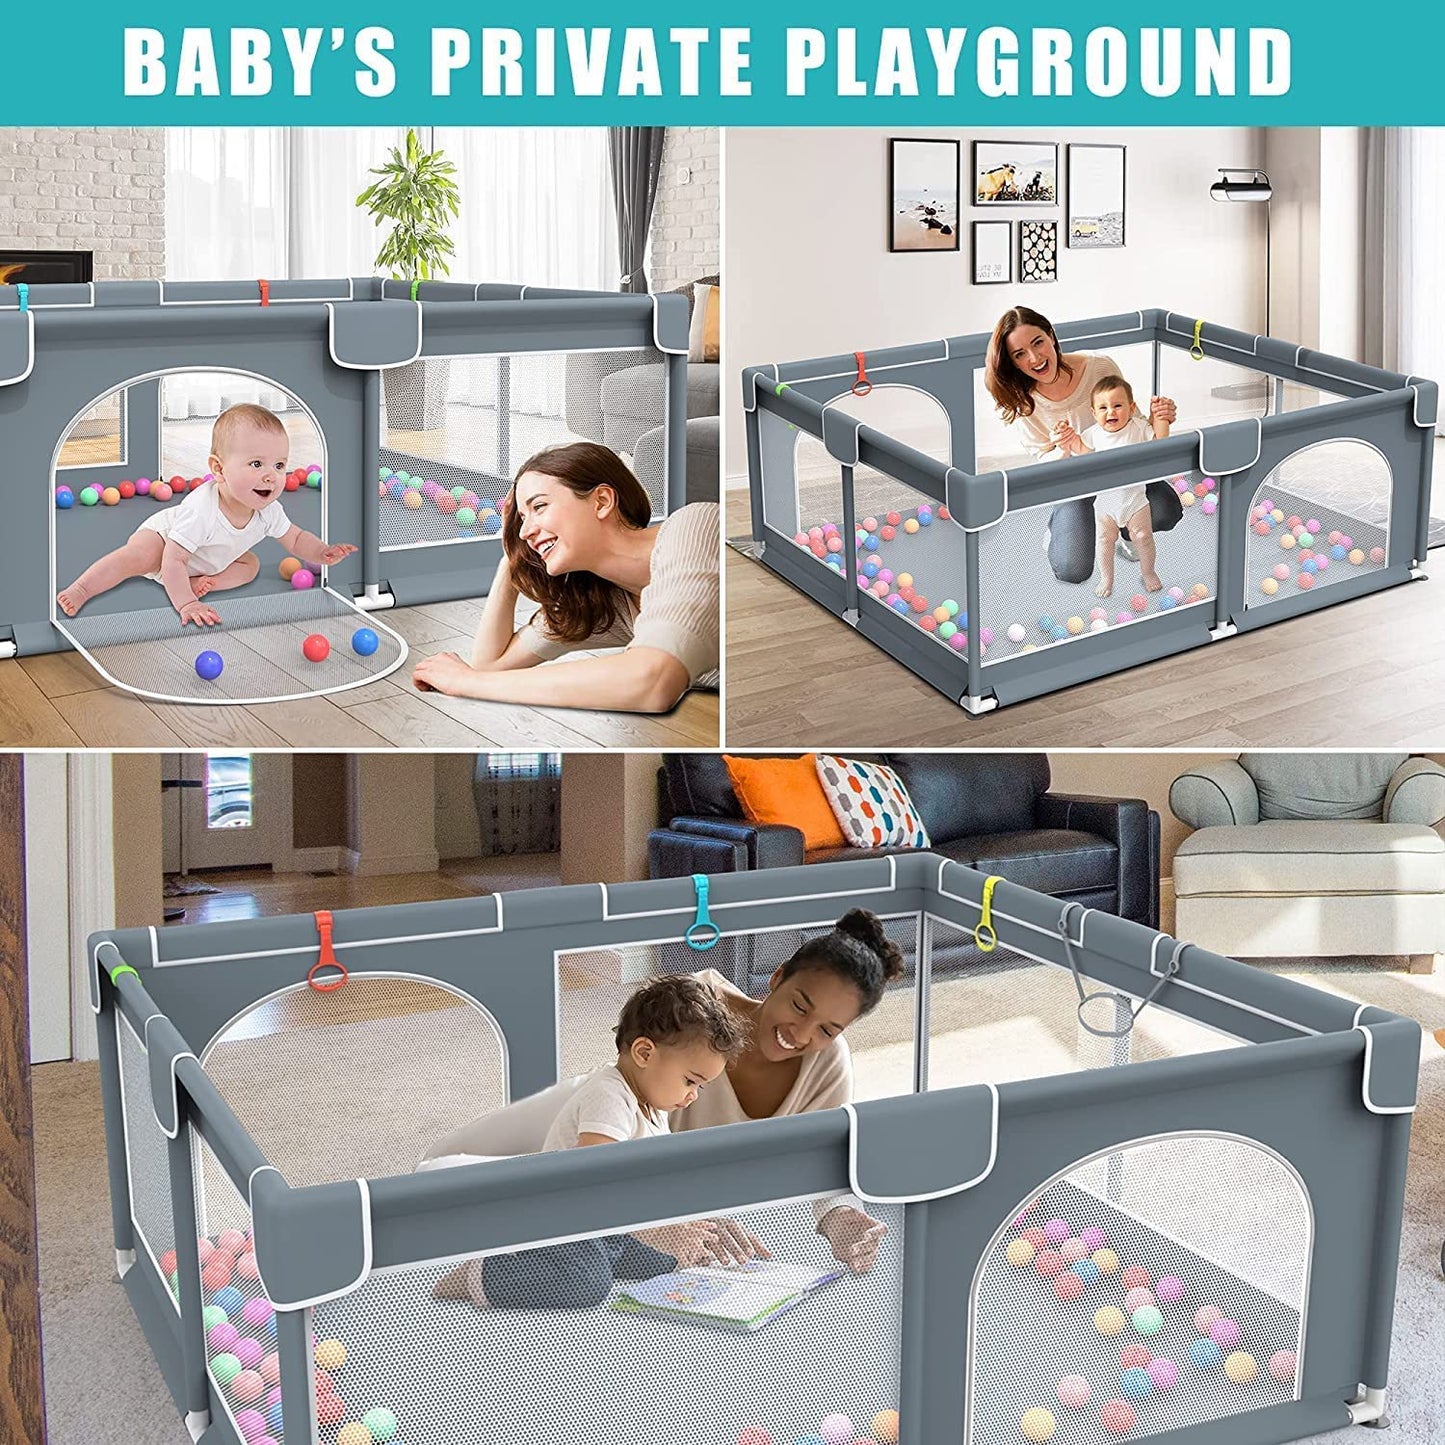 Portable Extra Large Baby Playpen with 50 PCS Ocean Balls - Buy Portable Extra Large Baby Playpen with 50 PCS Ocean Balls in Dubai - HOCC Dubai - Baby playground outdoor - Shop baby product - Shop Pet product - shop home decor and lighting in Dubai - HOCC